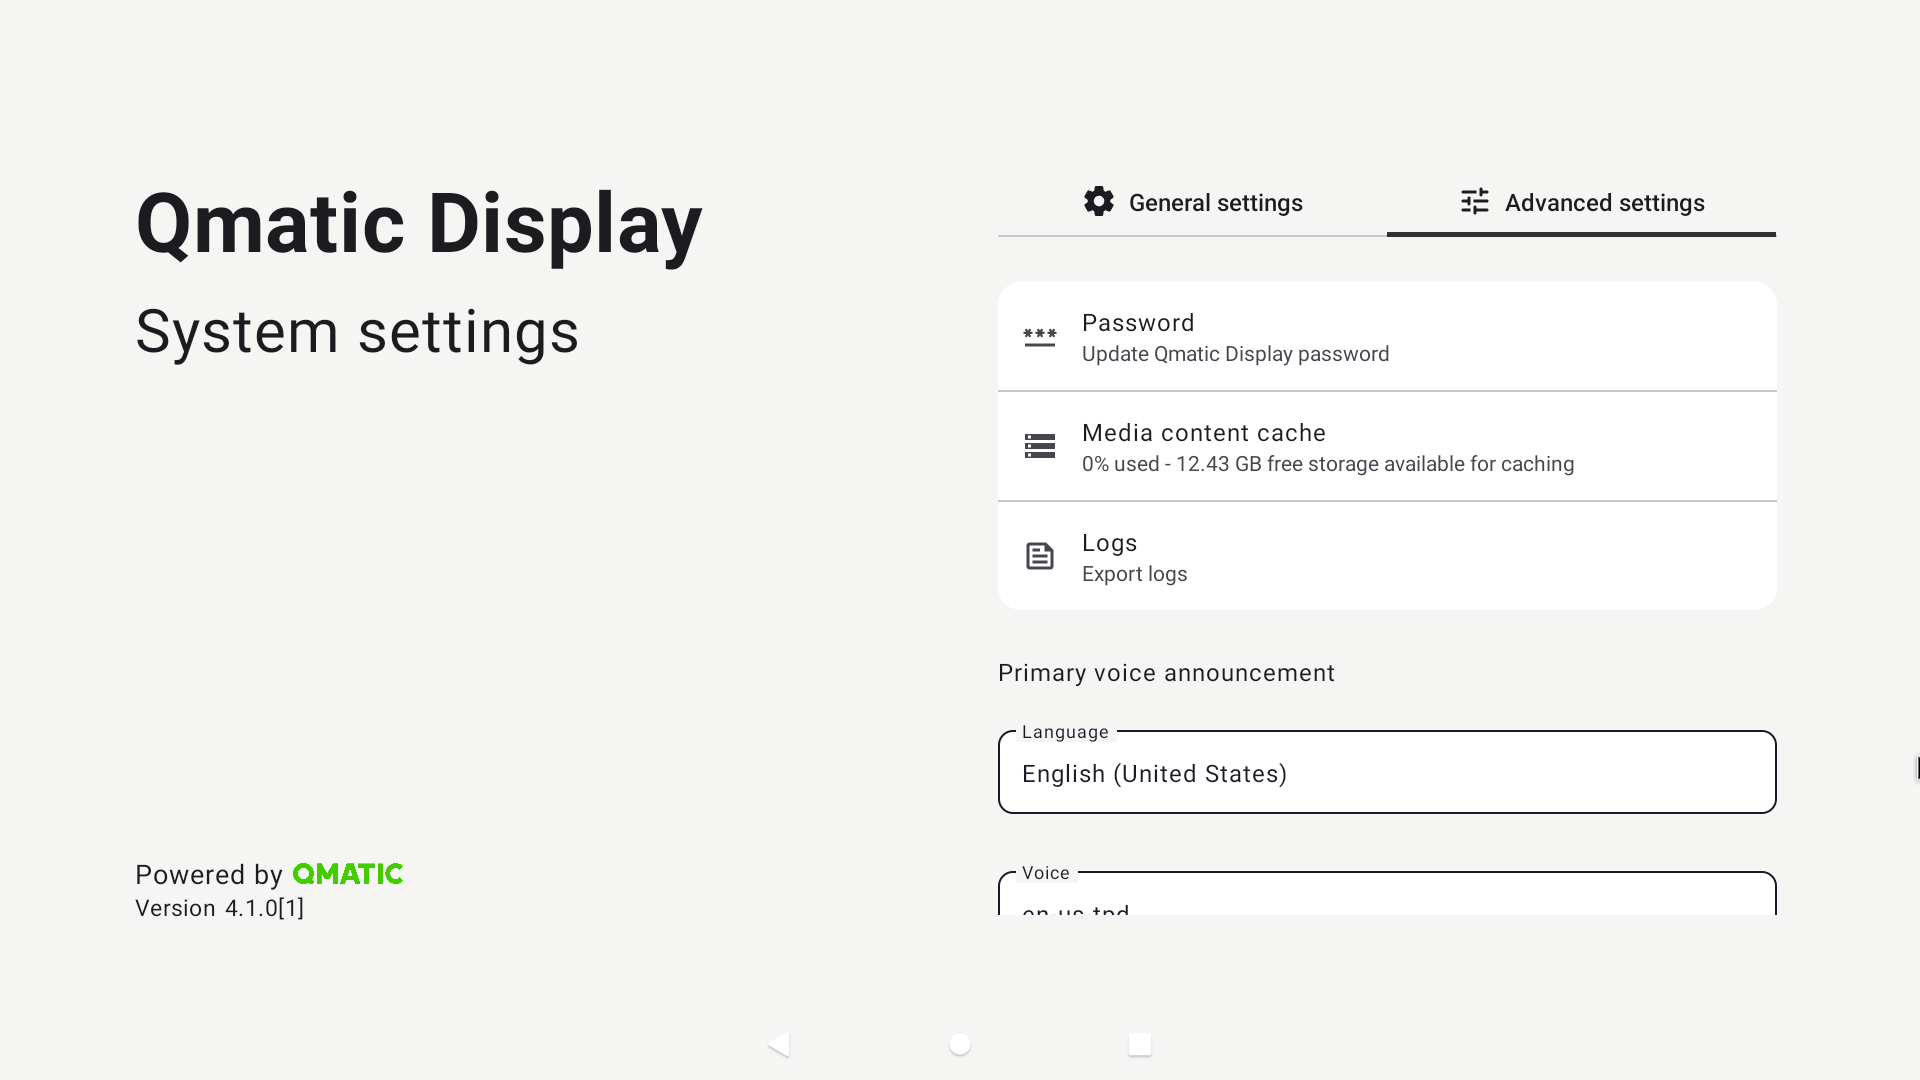 Qmatic Display App System Settings